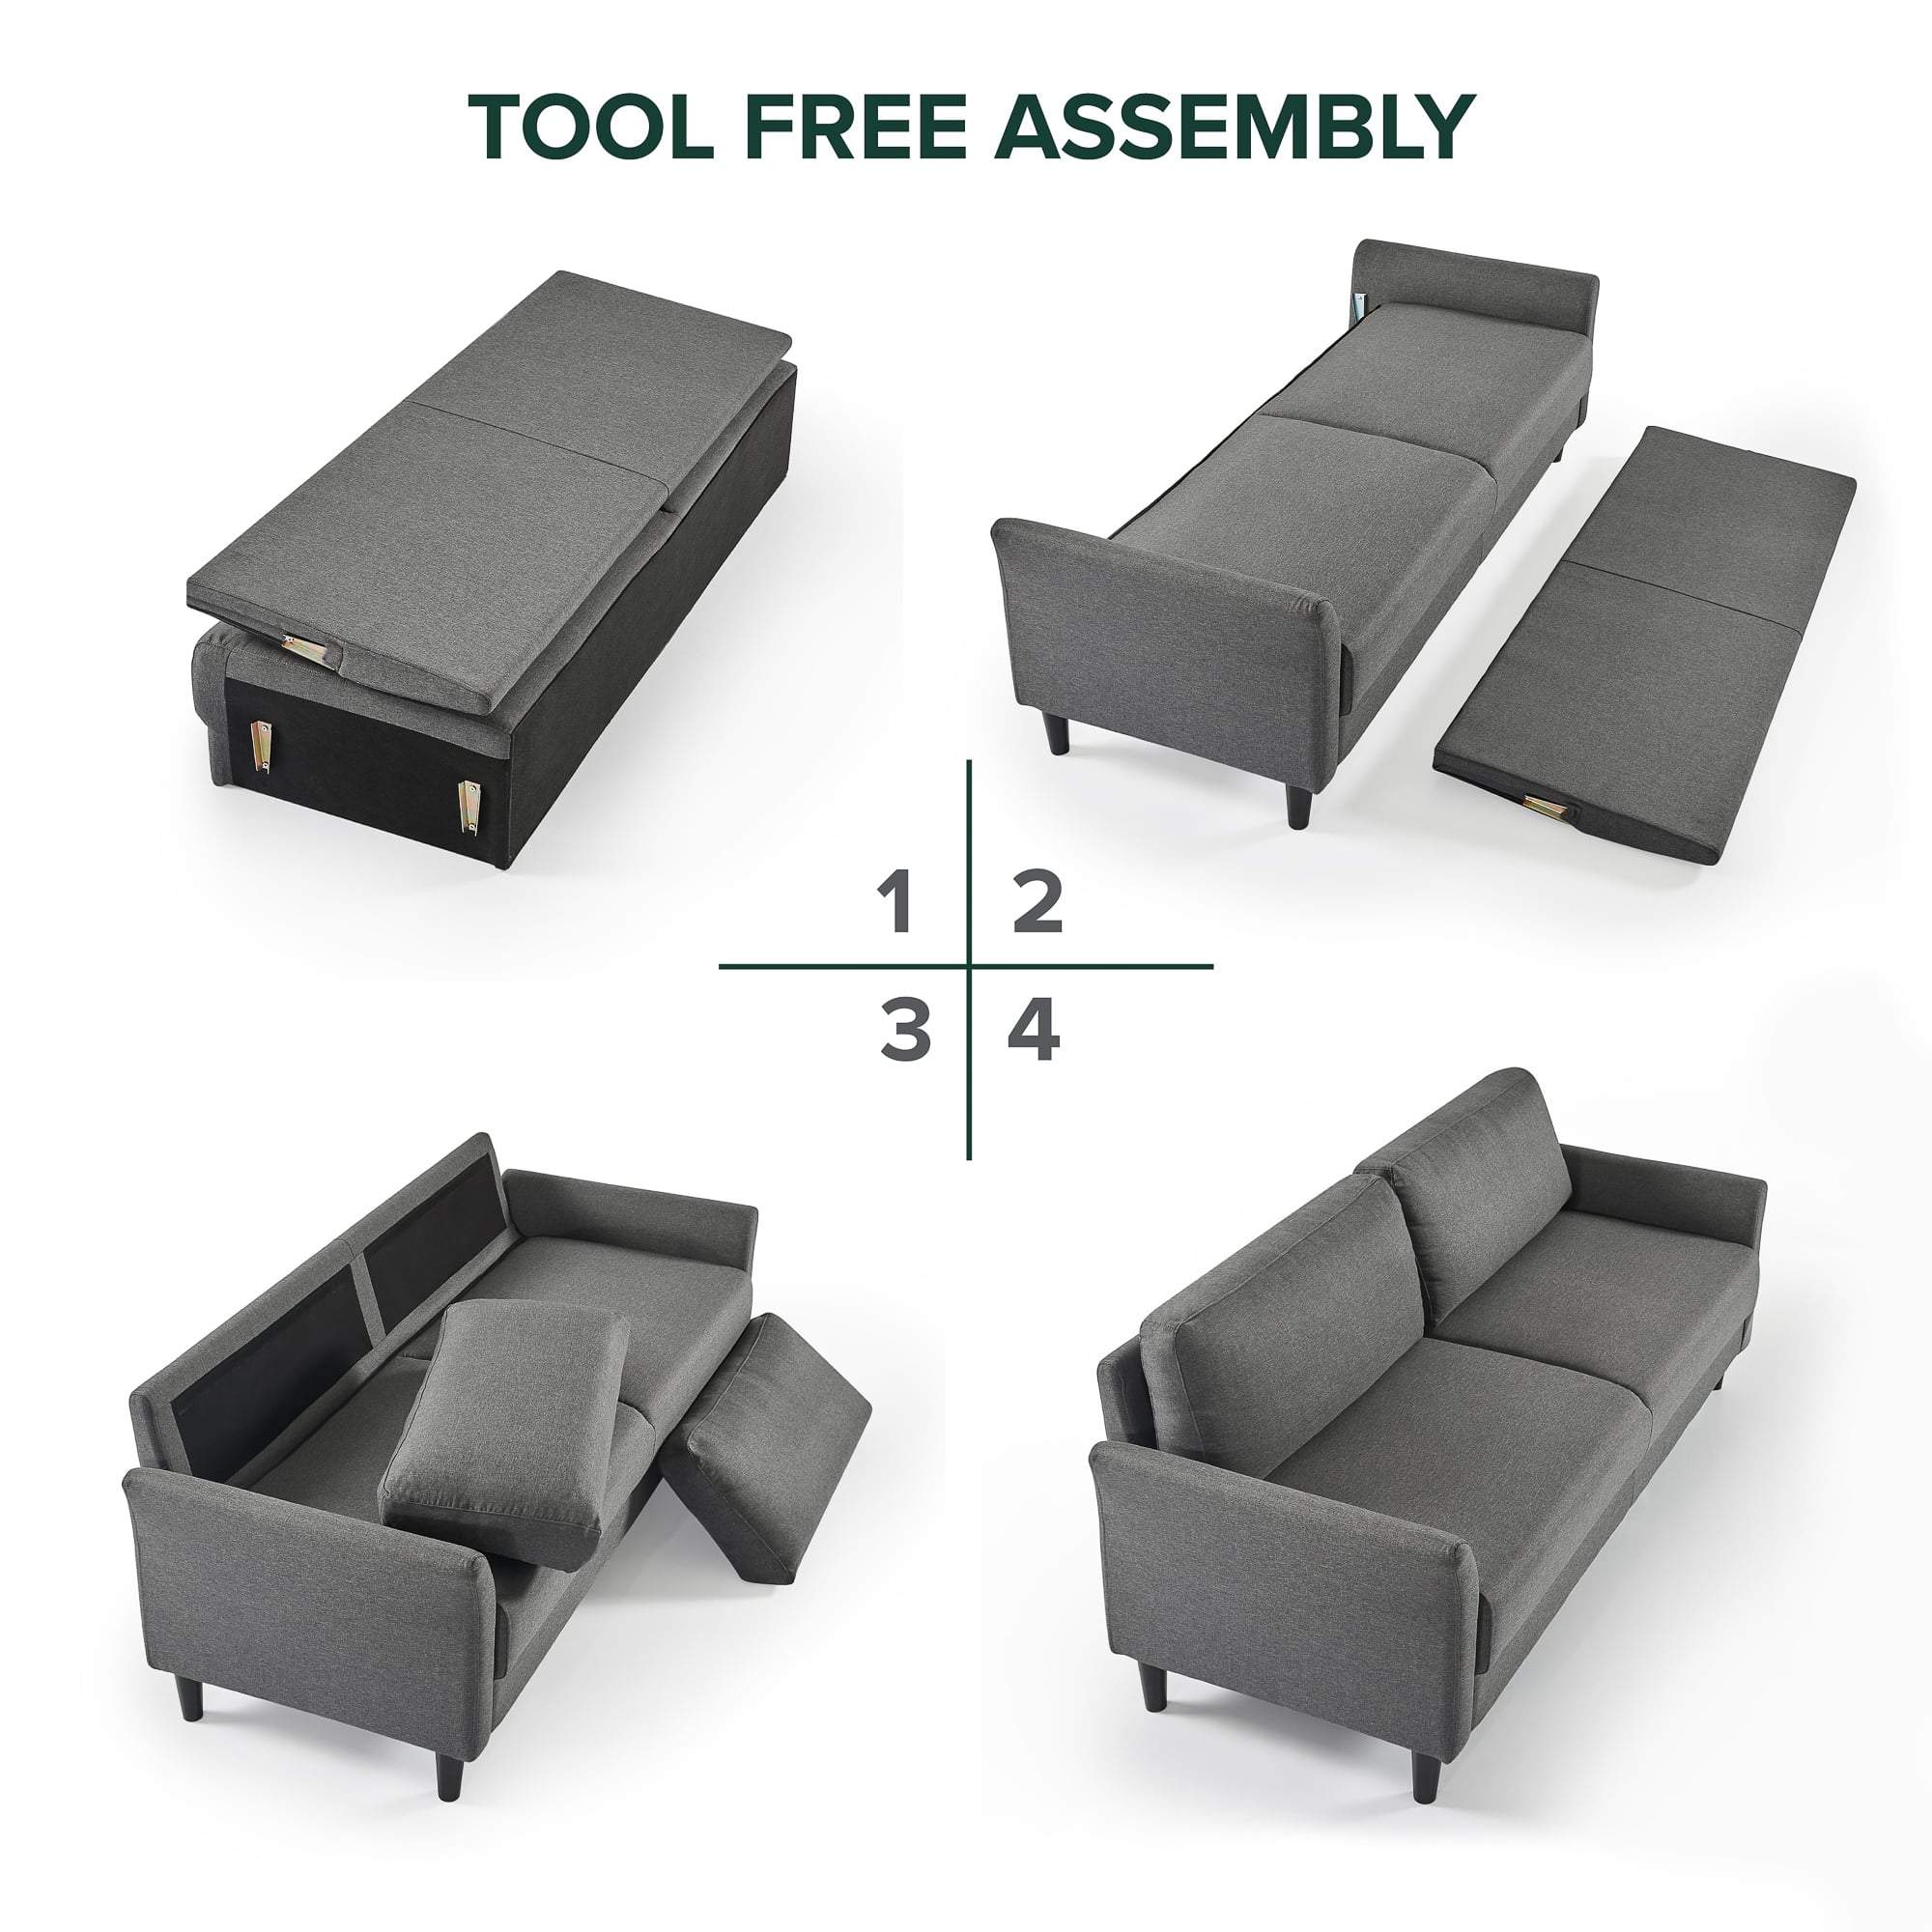 Jackie Classic Sofa assembly